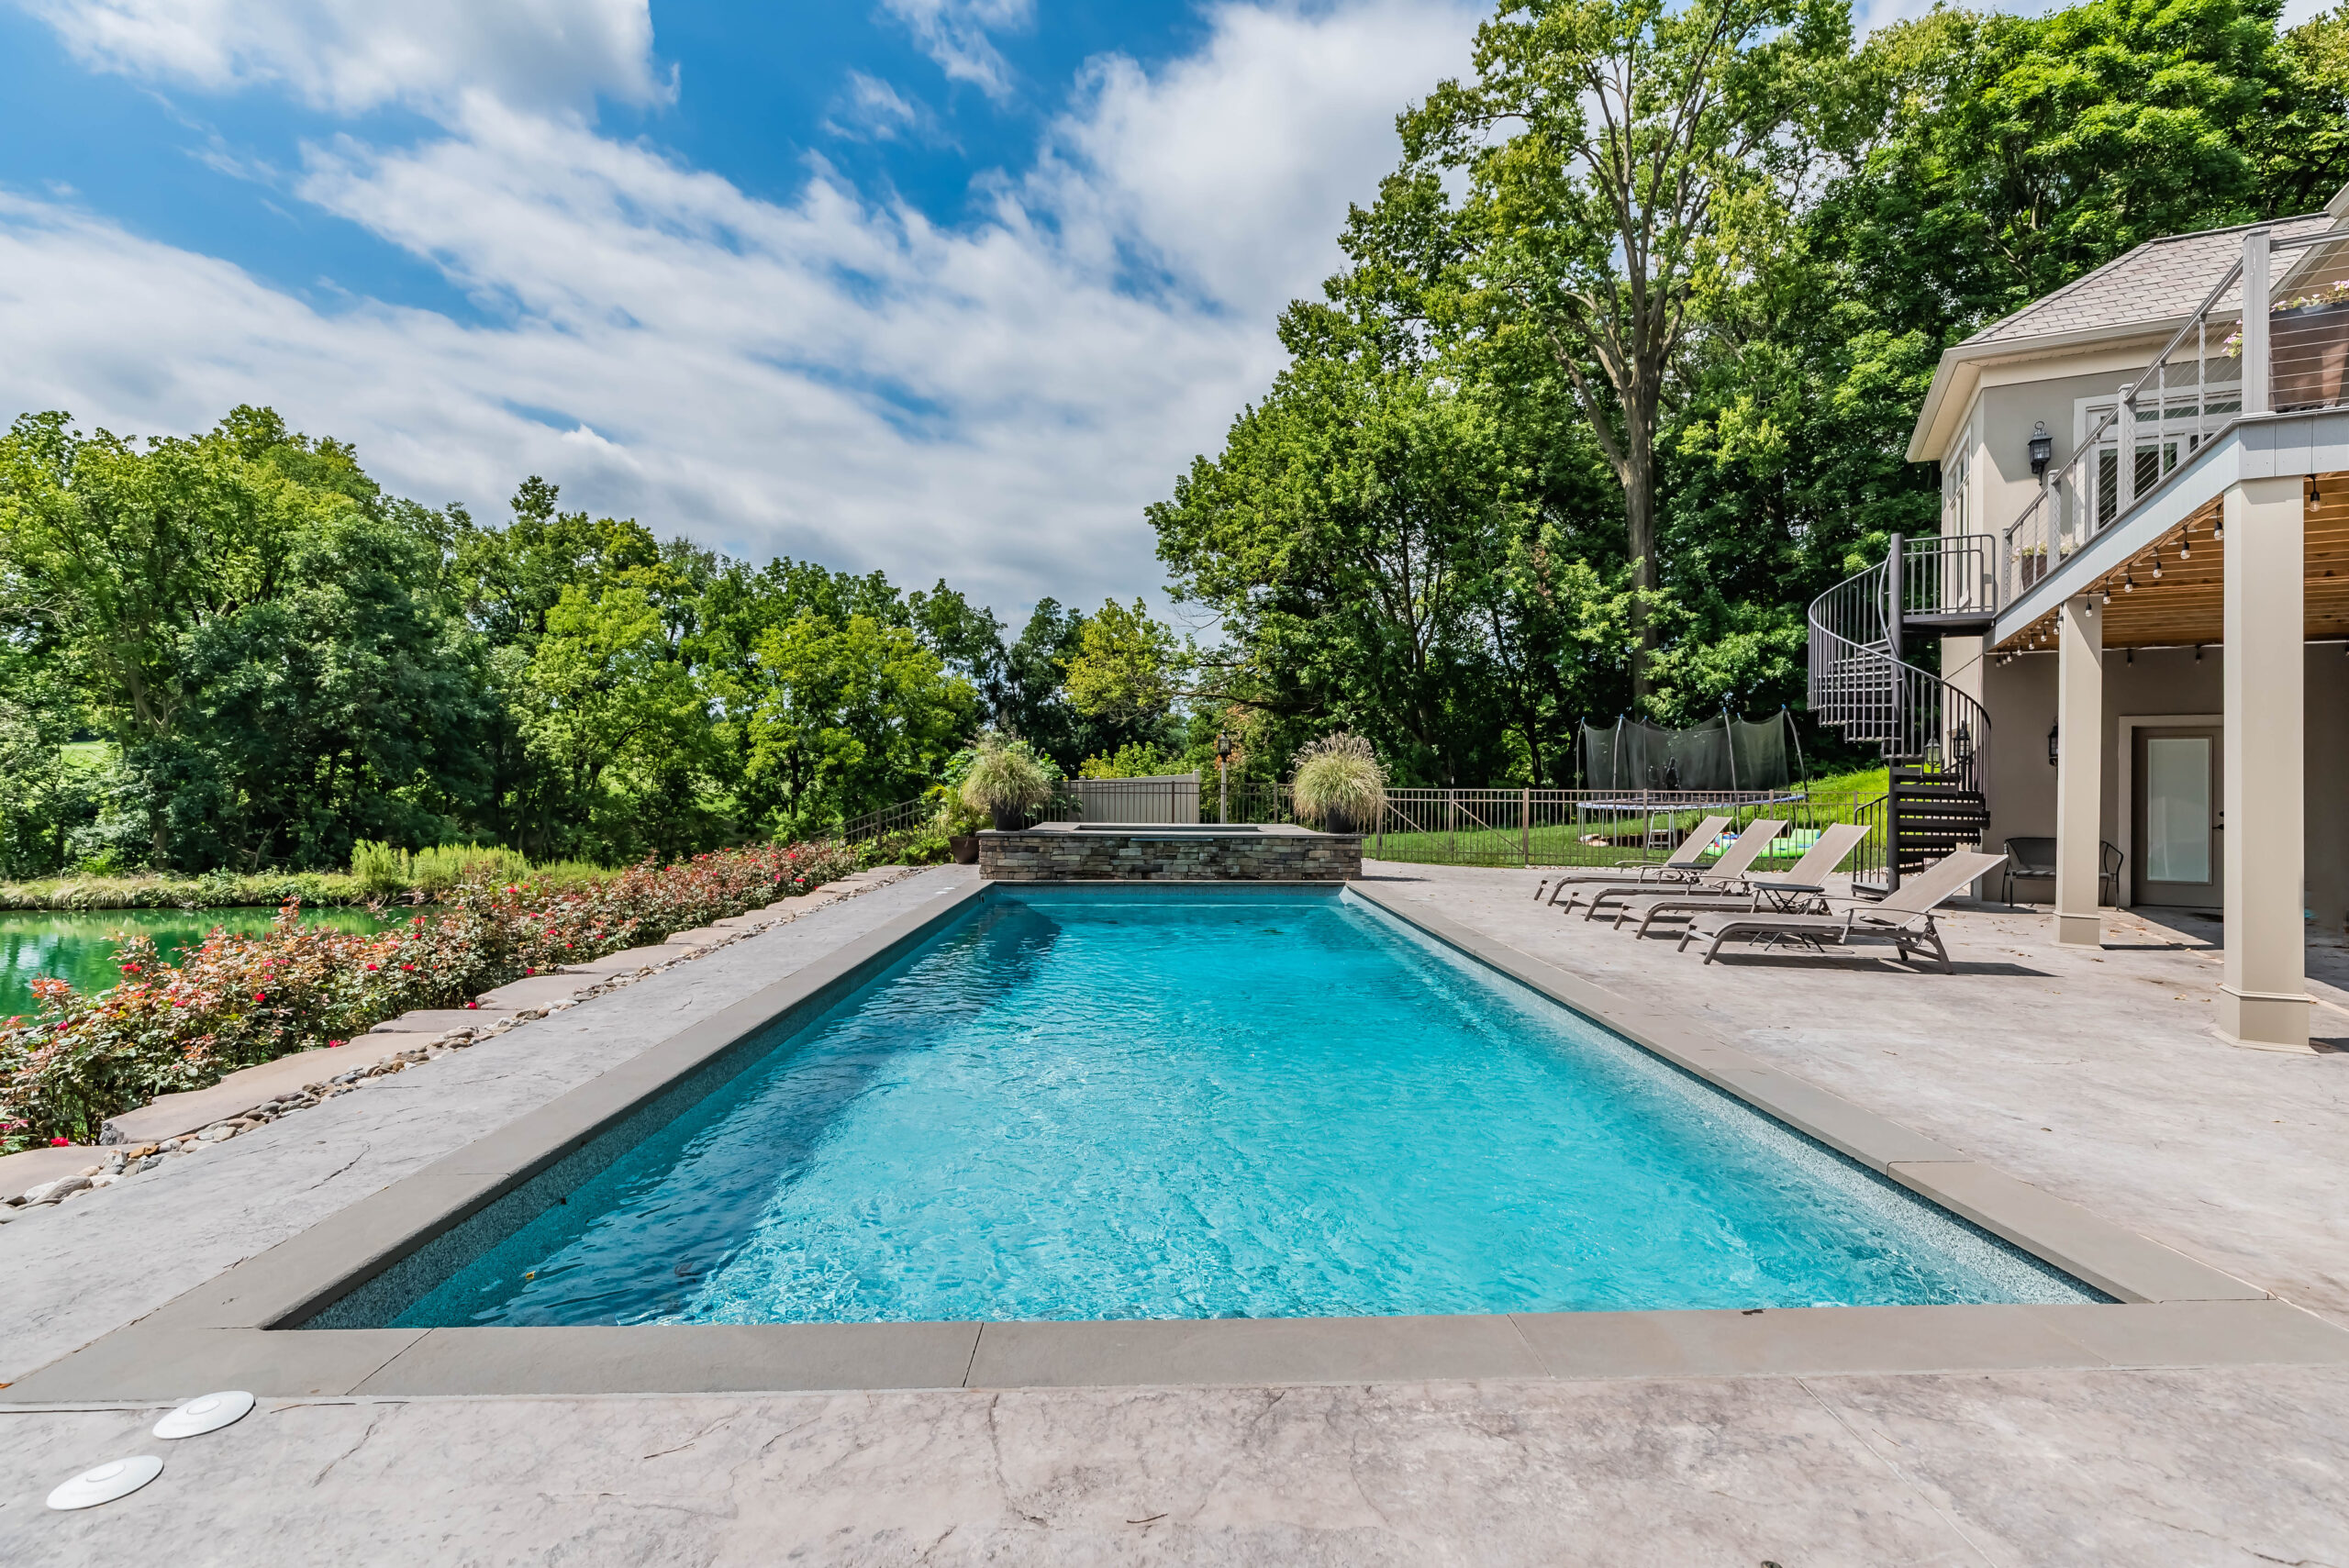 Large rectangular fiberglass pool with outdoor seating on a sunny day